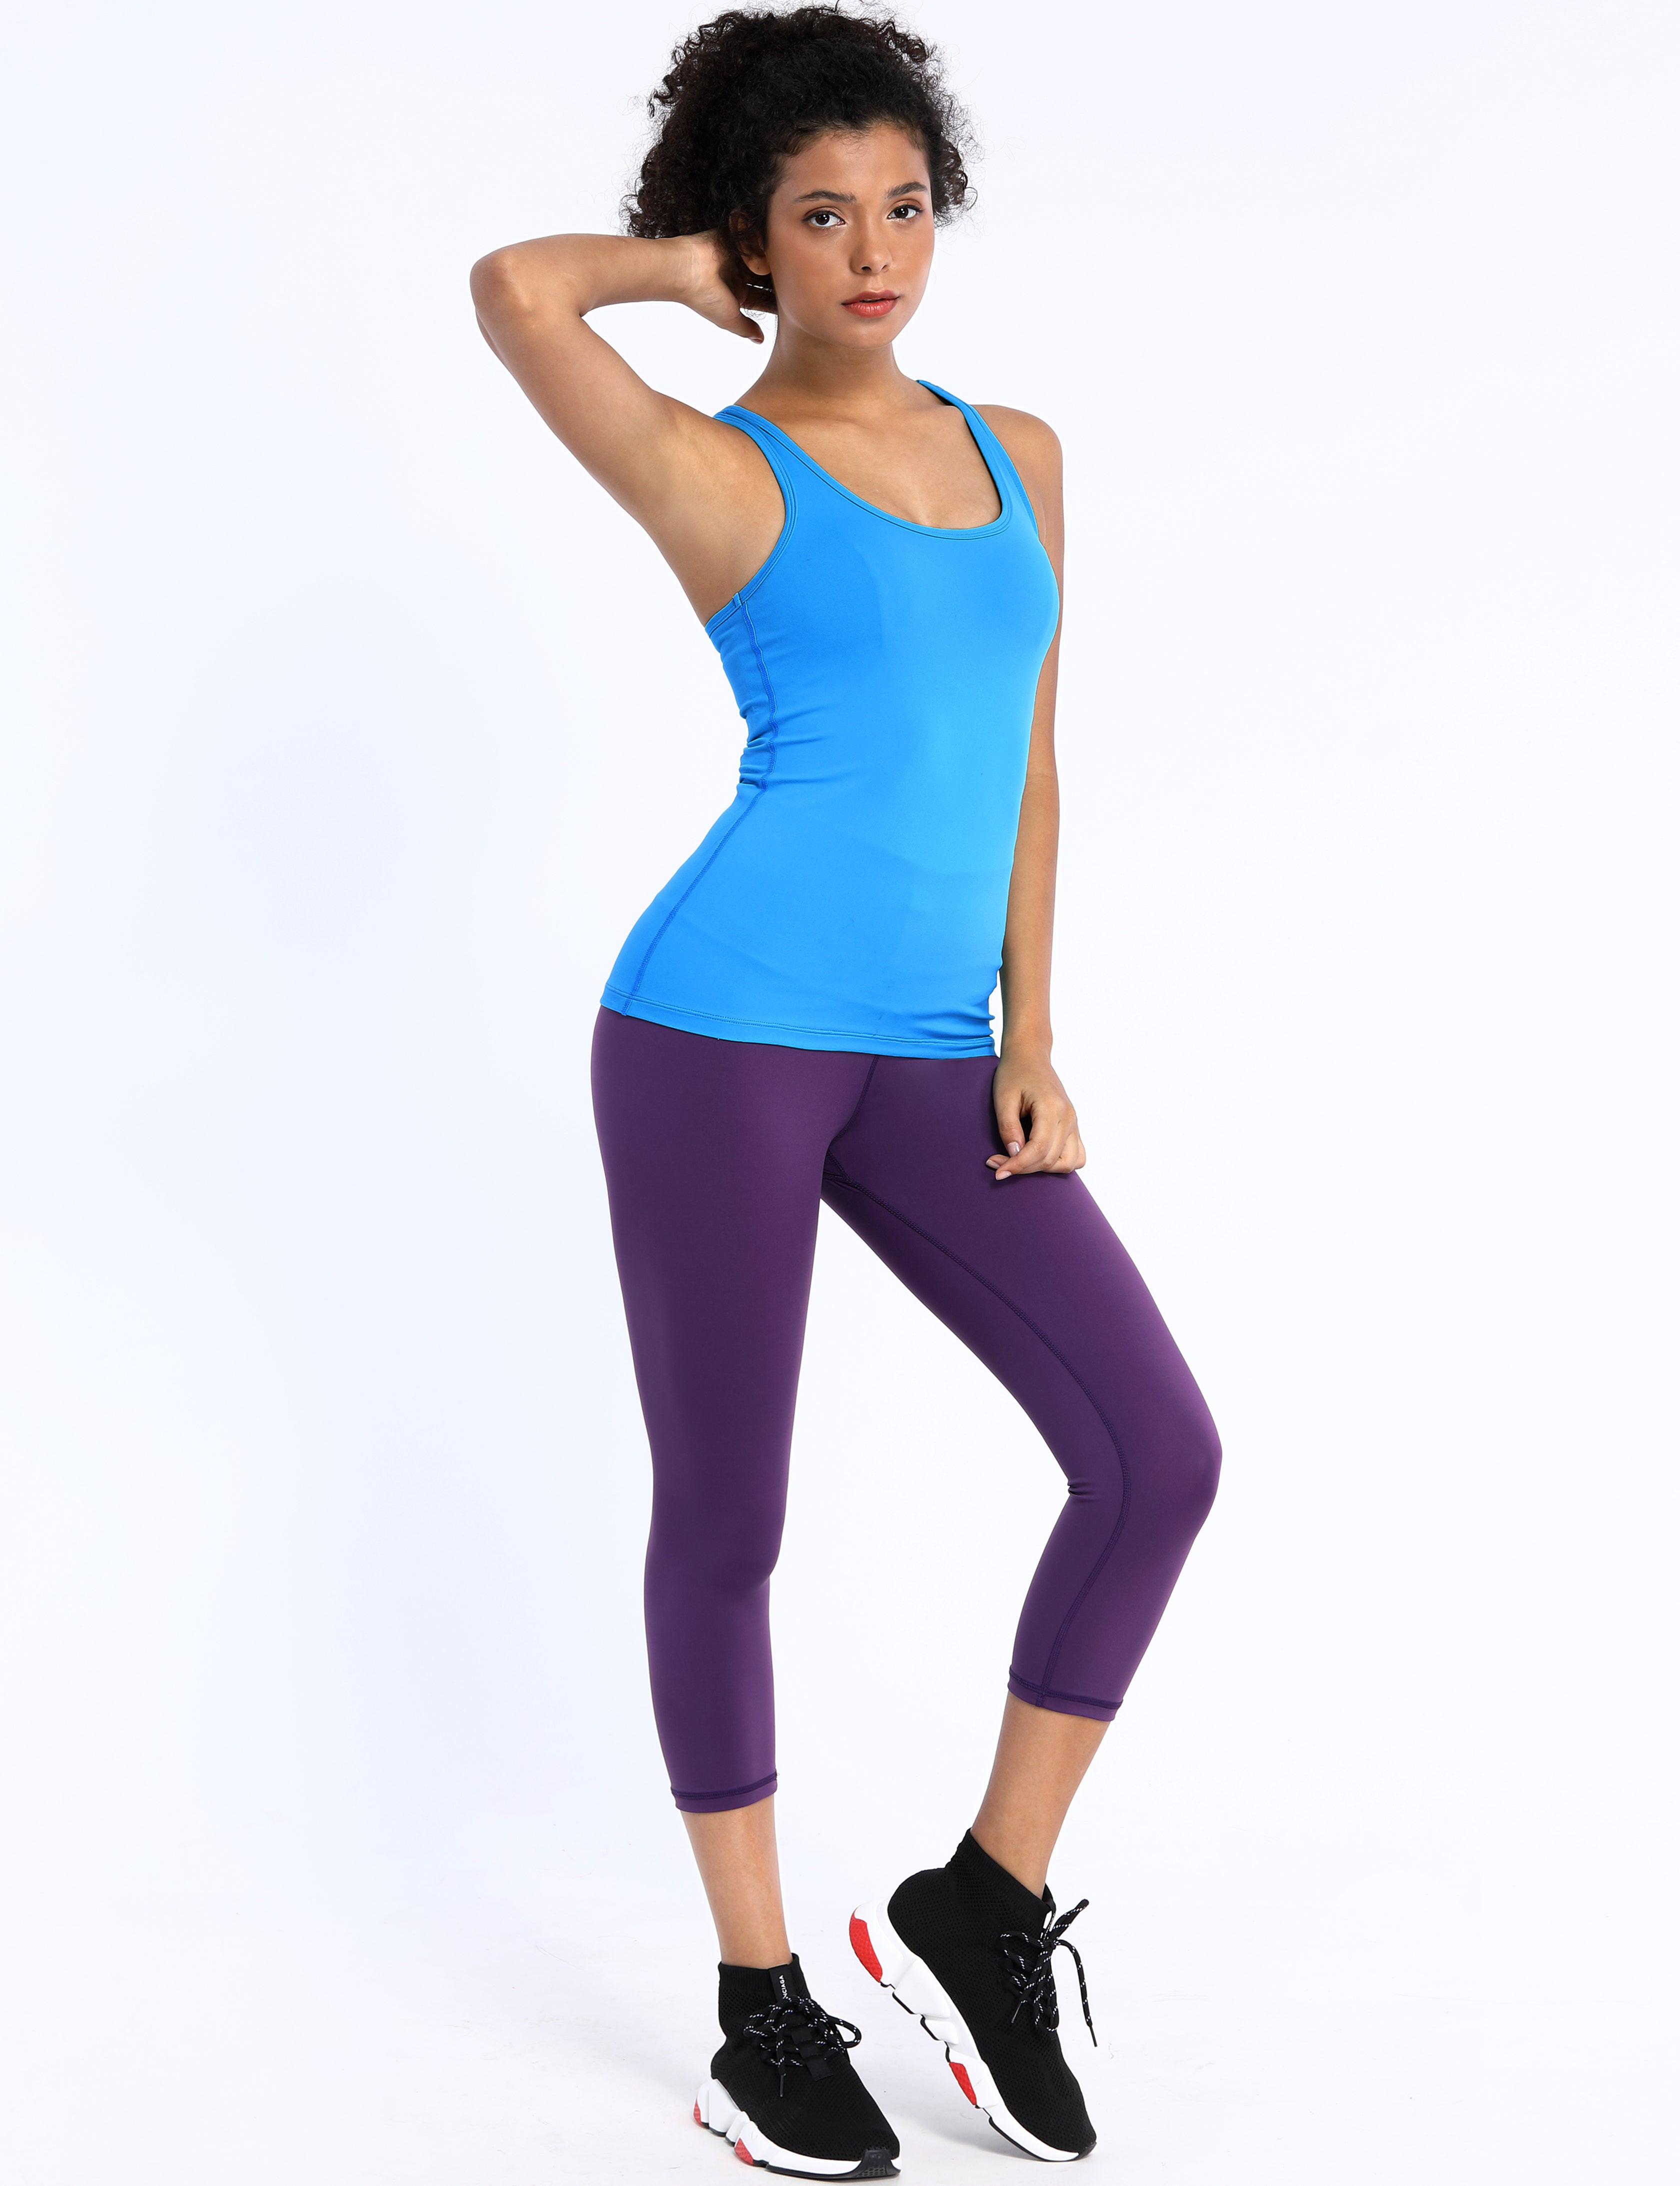 Racerback Athletic Tank Tops electricblue 92%Nylon/8%Spandex(Cotton Soft) Designed for Golf Tight Fit So buttery soft, it feels weightless Sweat-wicking Four-way stretch Breathable Contours your body Sits below the waistband for moderate, everyday coverage